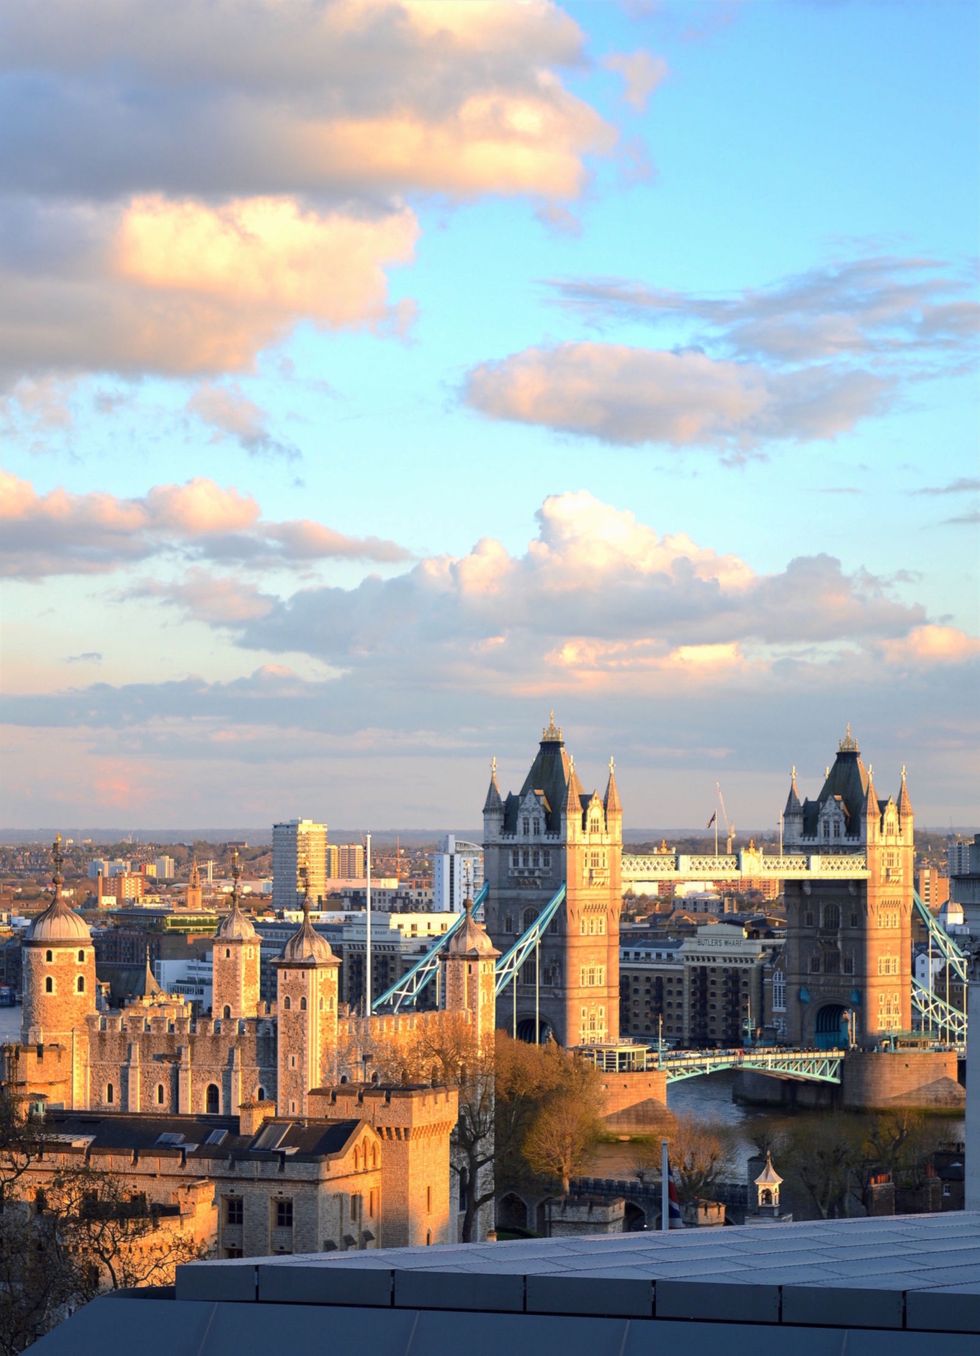 <p>Some of the best views in London are at the most unexpected locations. Believe it or not, this is the lookout from the Hilton Double Tree <a href="http://doubletree3.hilton.com/en/hotels/united-kingdom/doubletree-by-hilton-hotel-london-tower-of-london-LONTLDI/dining/index.html?WT.mc_id=zELWAKN0EMEA1DT2DMH3LocalSearch4DGGenericx6LONTLDI" target="_blank">Sky Lounge</a>; it's one of the best views over the City of London and the perfect spot for a tasty cocktail while watching the sunset over the Thames.</p>